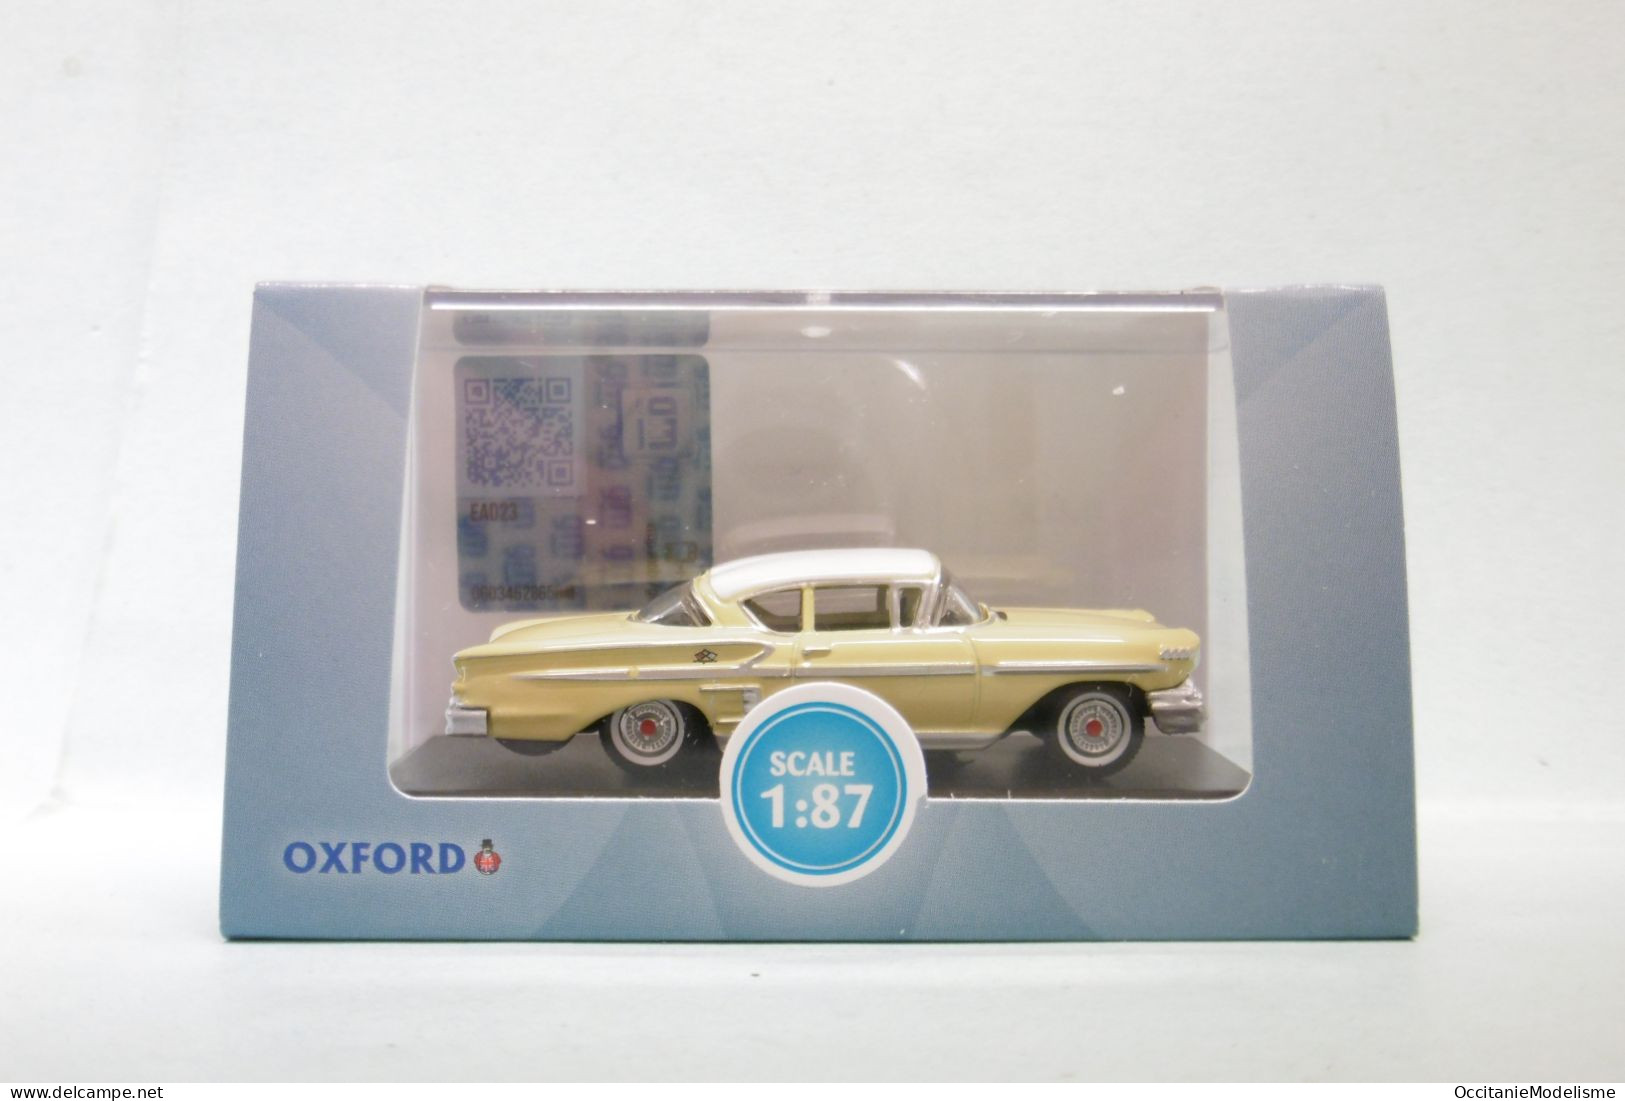 Oxford - CHEVROLET IMPALA SPORT COUPE 1958 Jaune Voiture US Neuf HO 1/87 - Véhicules Routiers